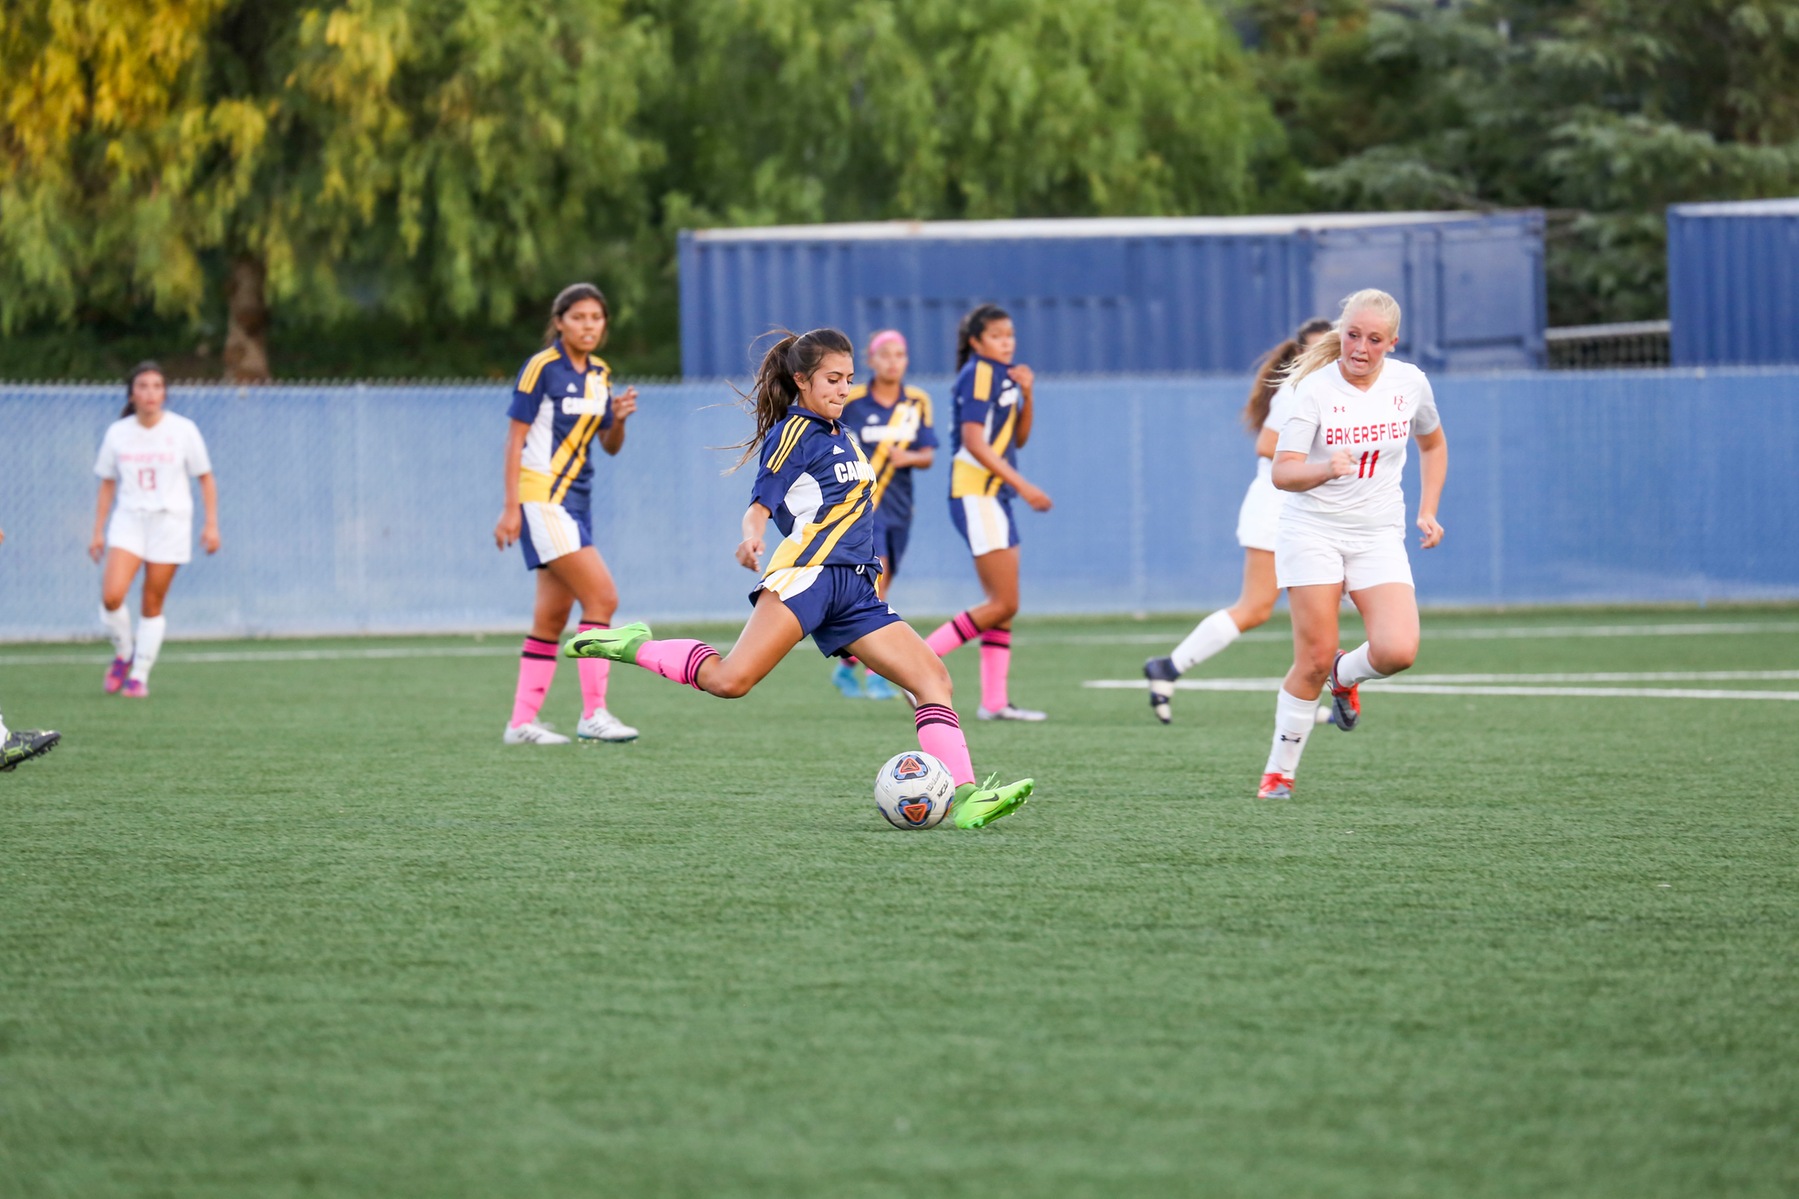 Canyons Claims First Conference Win in 5-1 Victory Over Bakersfield